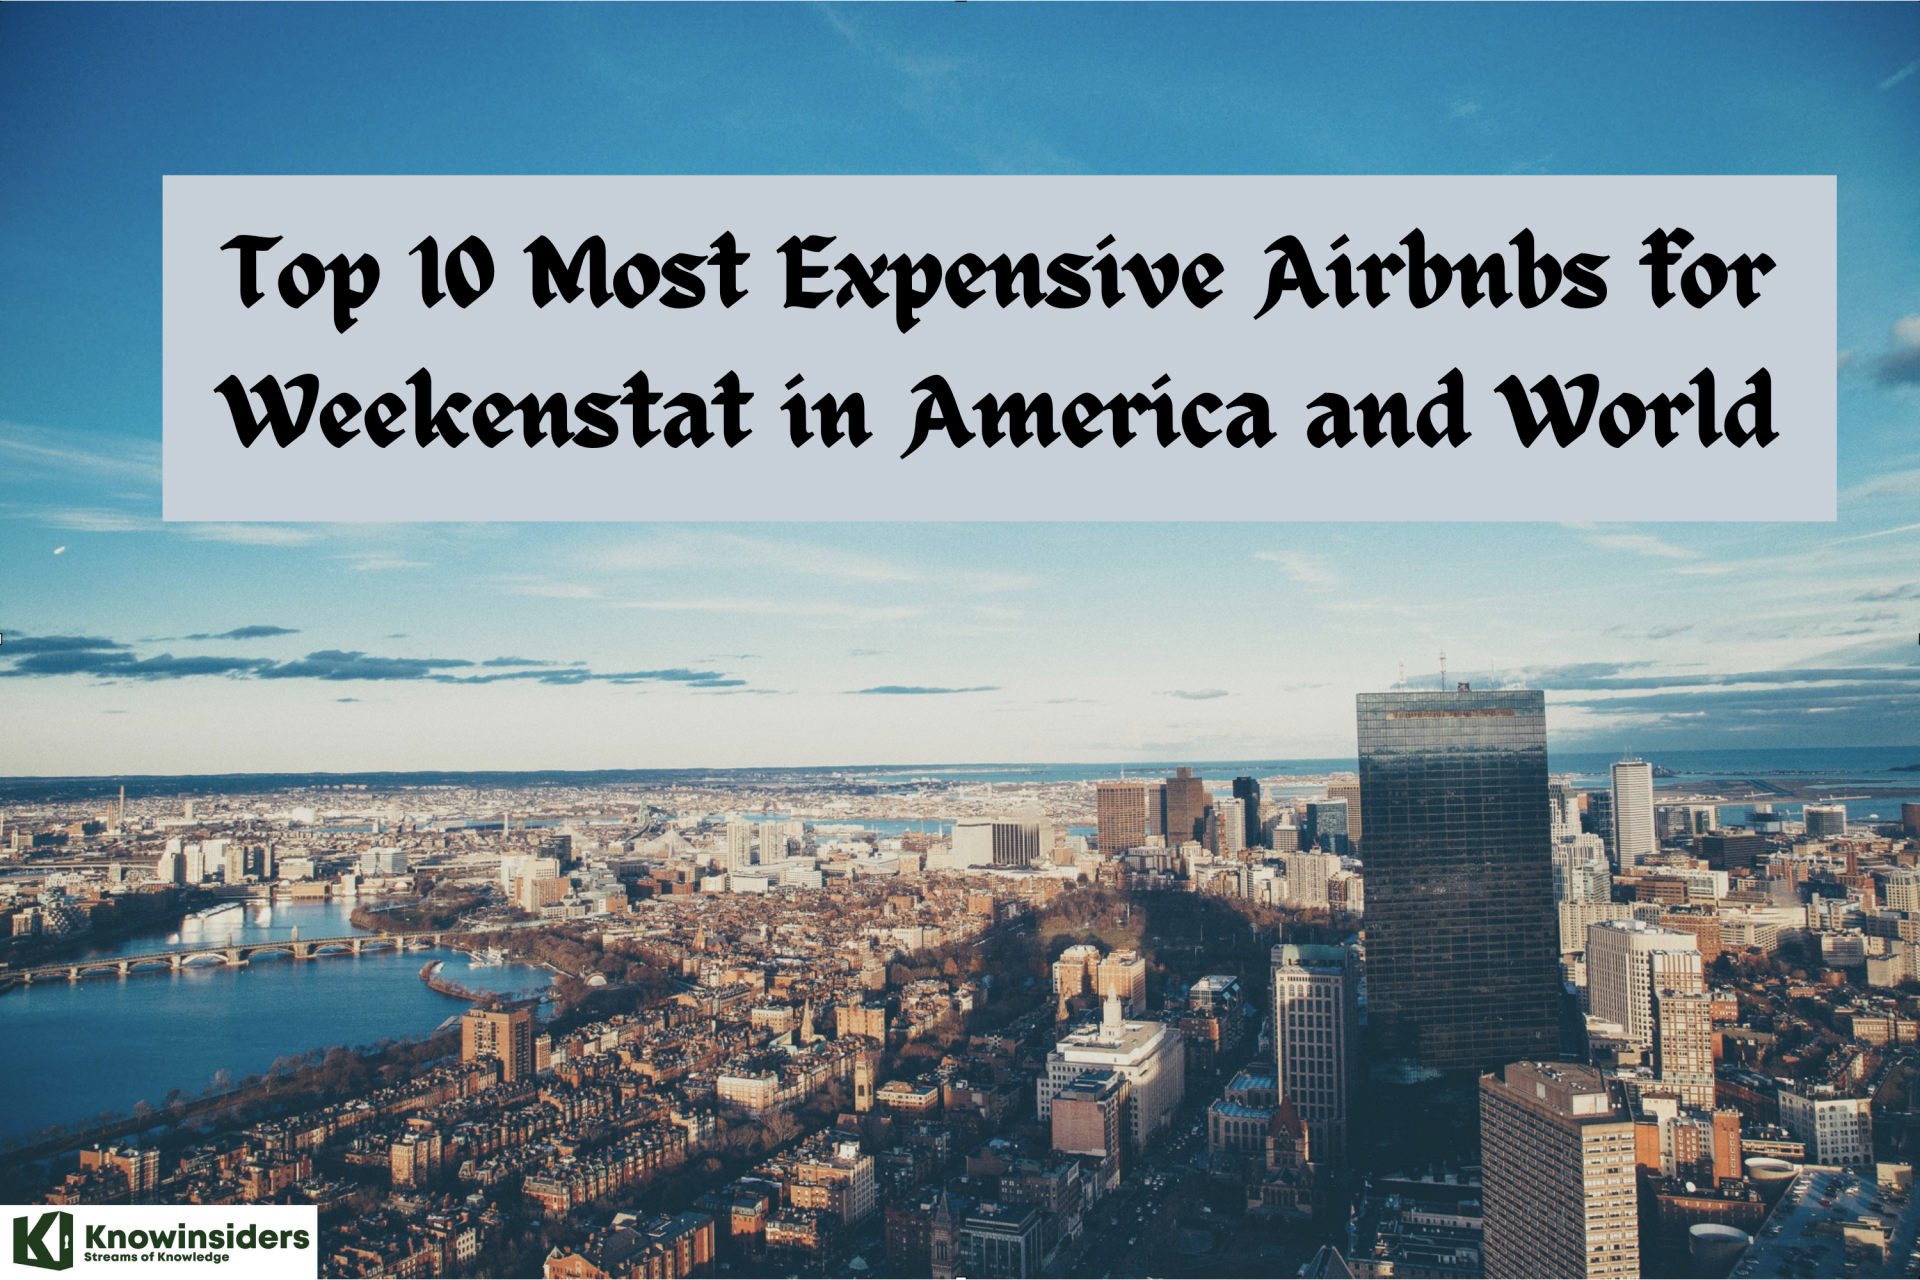 Top 10 Most Expensive Airbnbs for Weekend in America and World